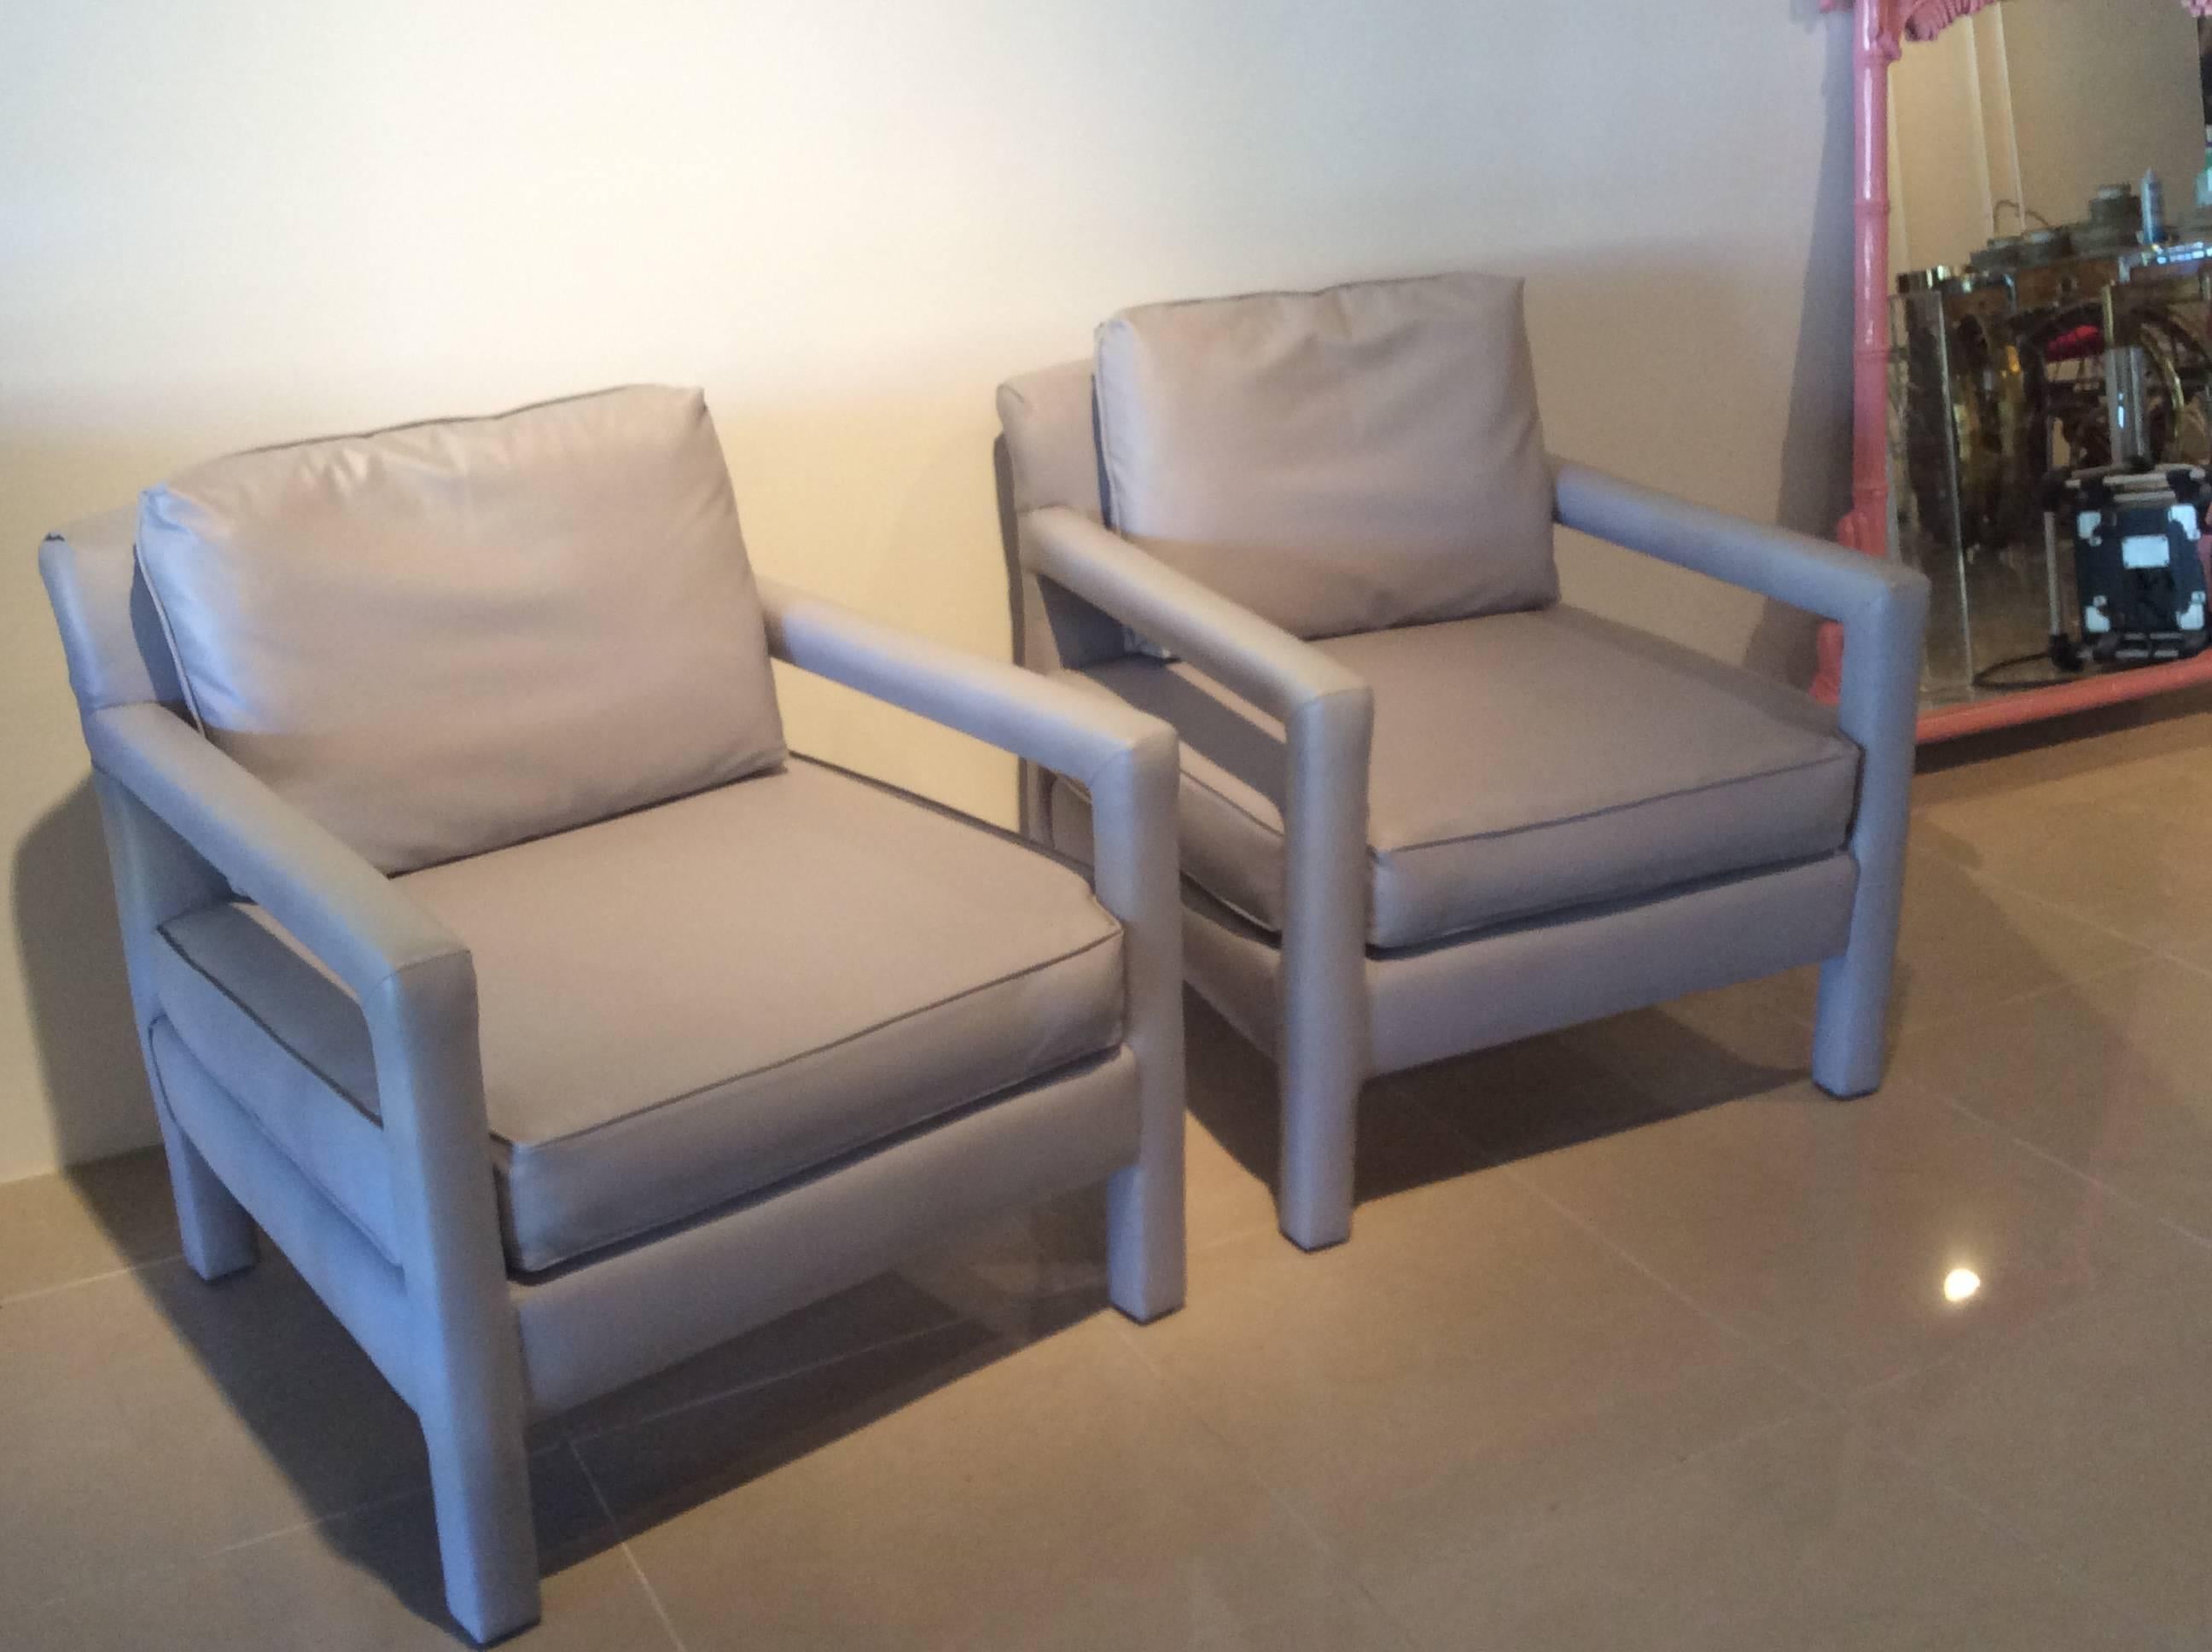 Hollywood Regency Parsons Chairs Vintage Pair of Grey Leather Arm Chairs Milo Baughman Style